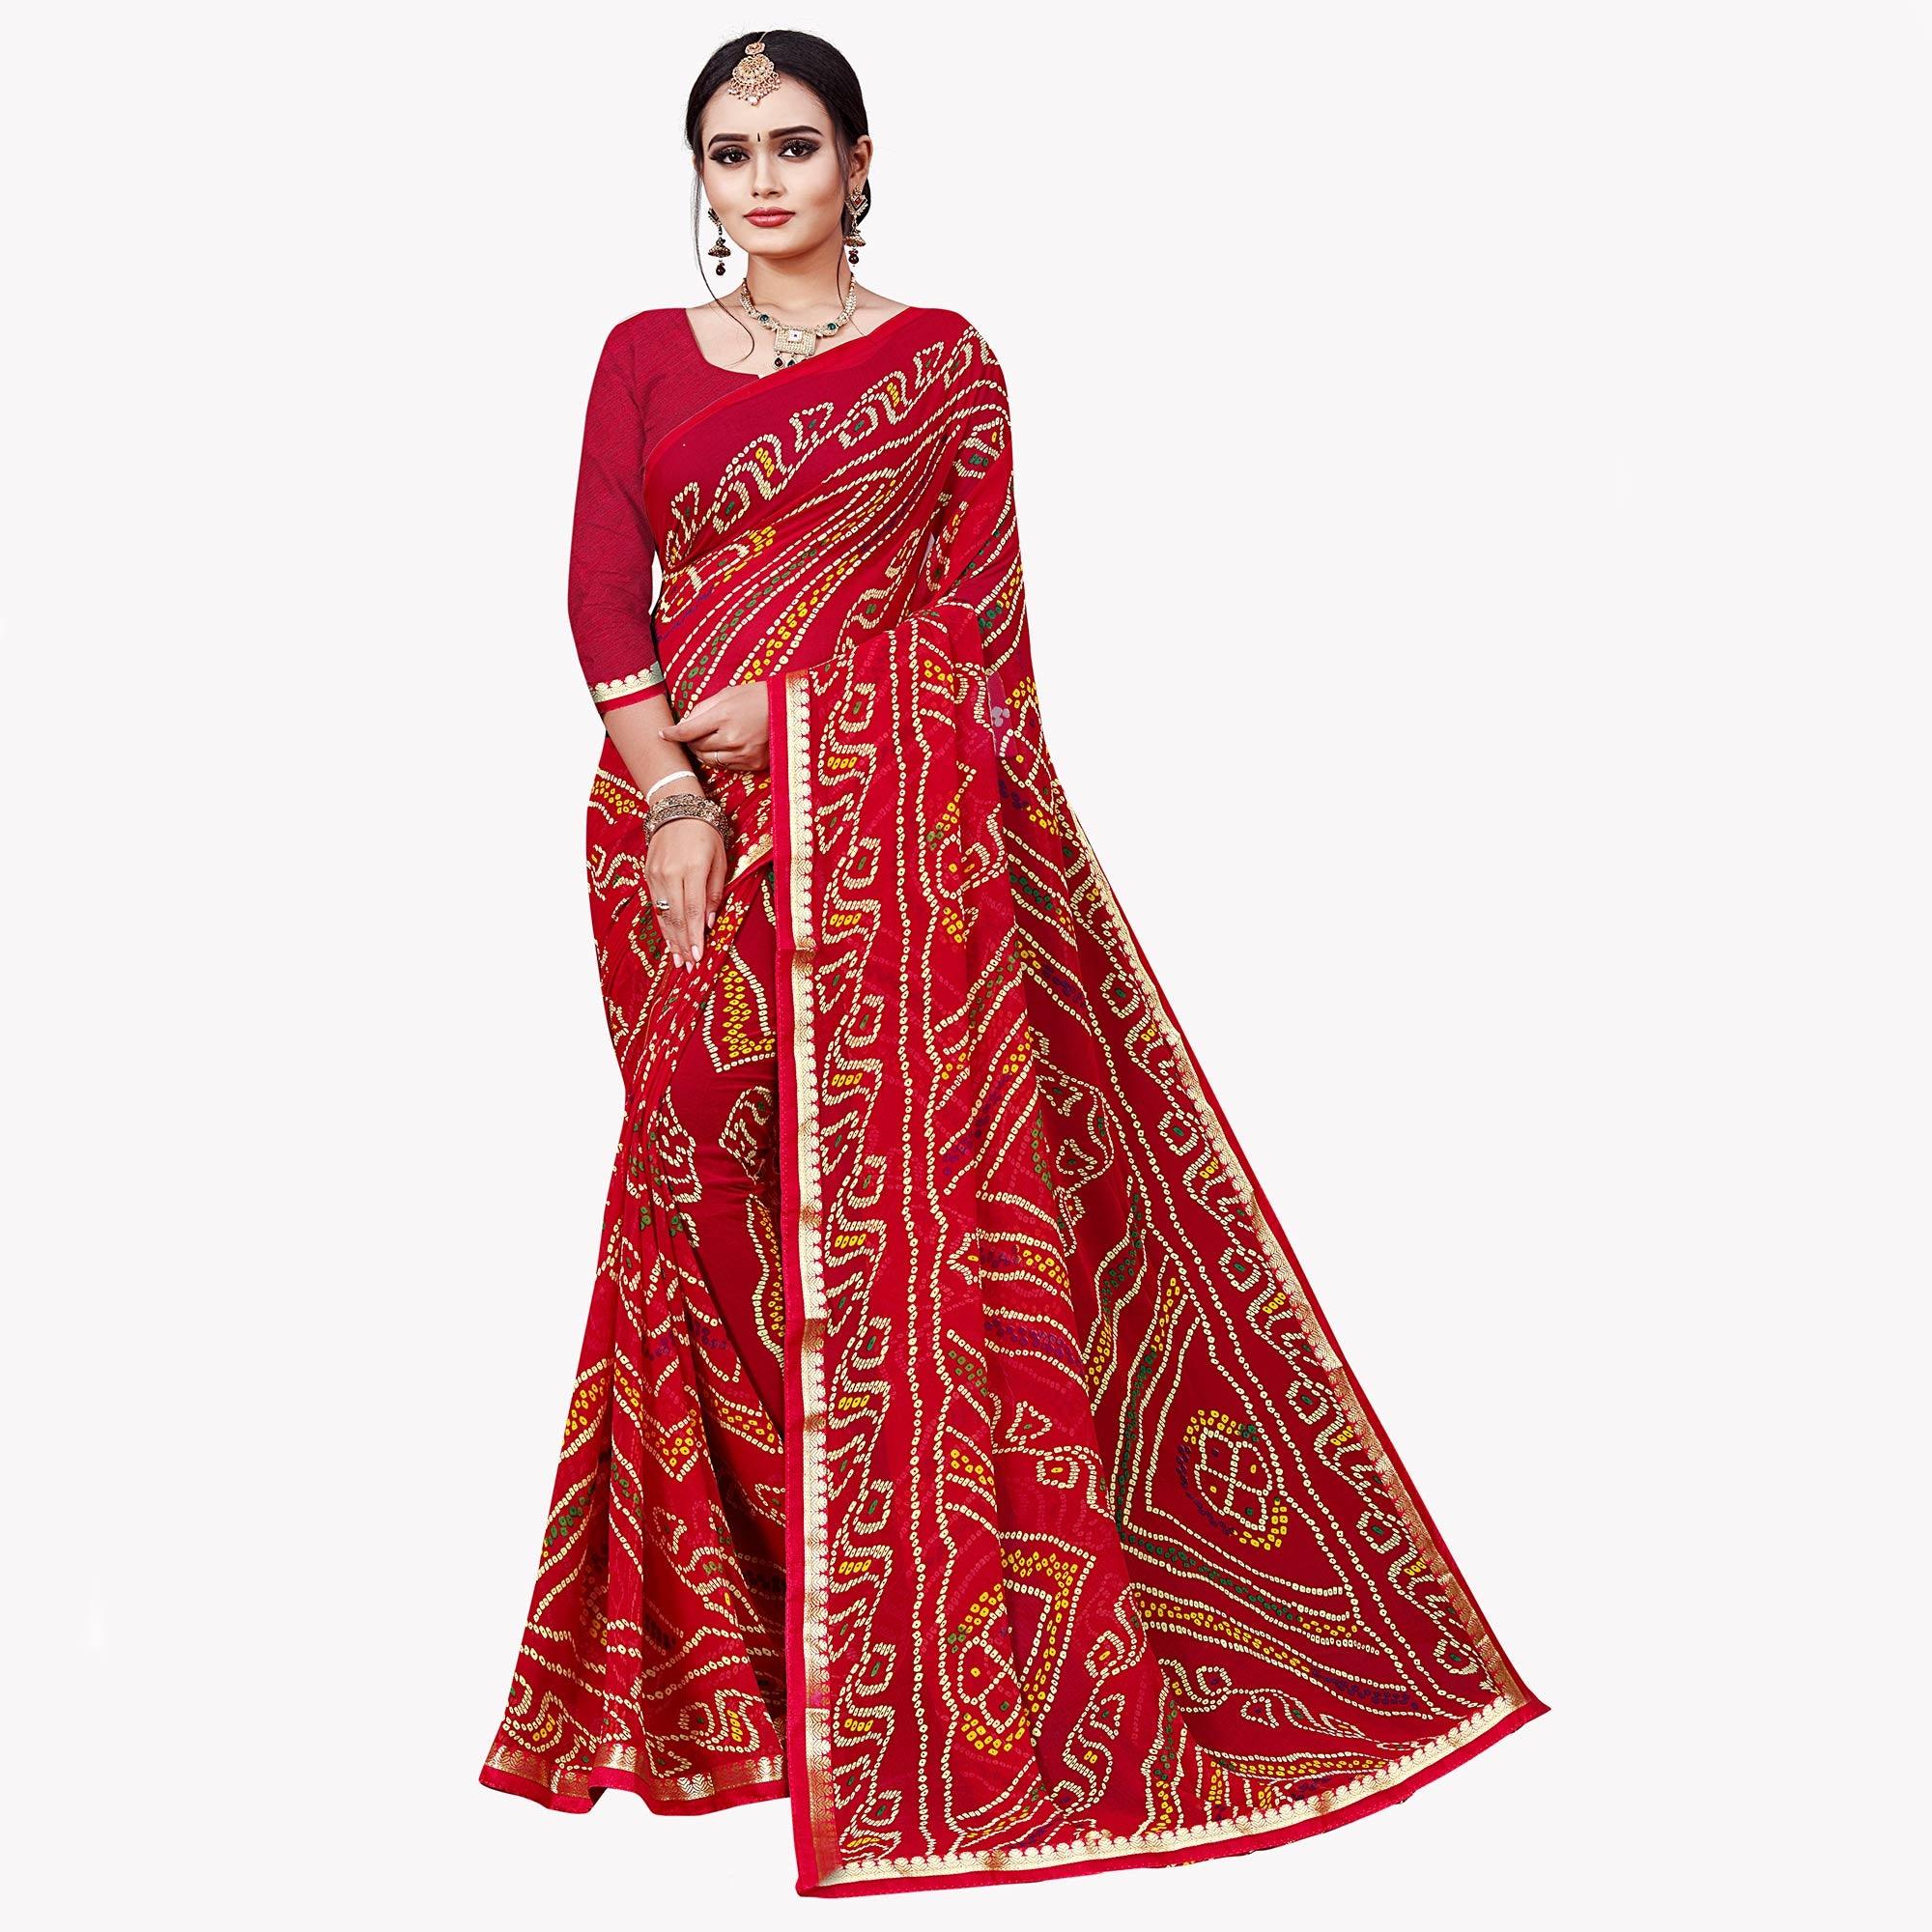 Red Festive  Wear Bandhani Printed Georgette Saree With Lace Border - Peachmode